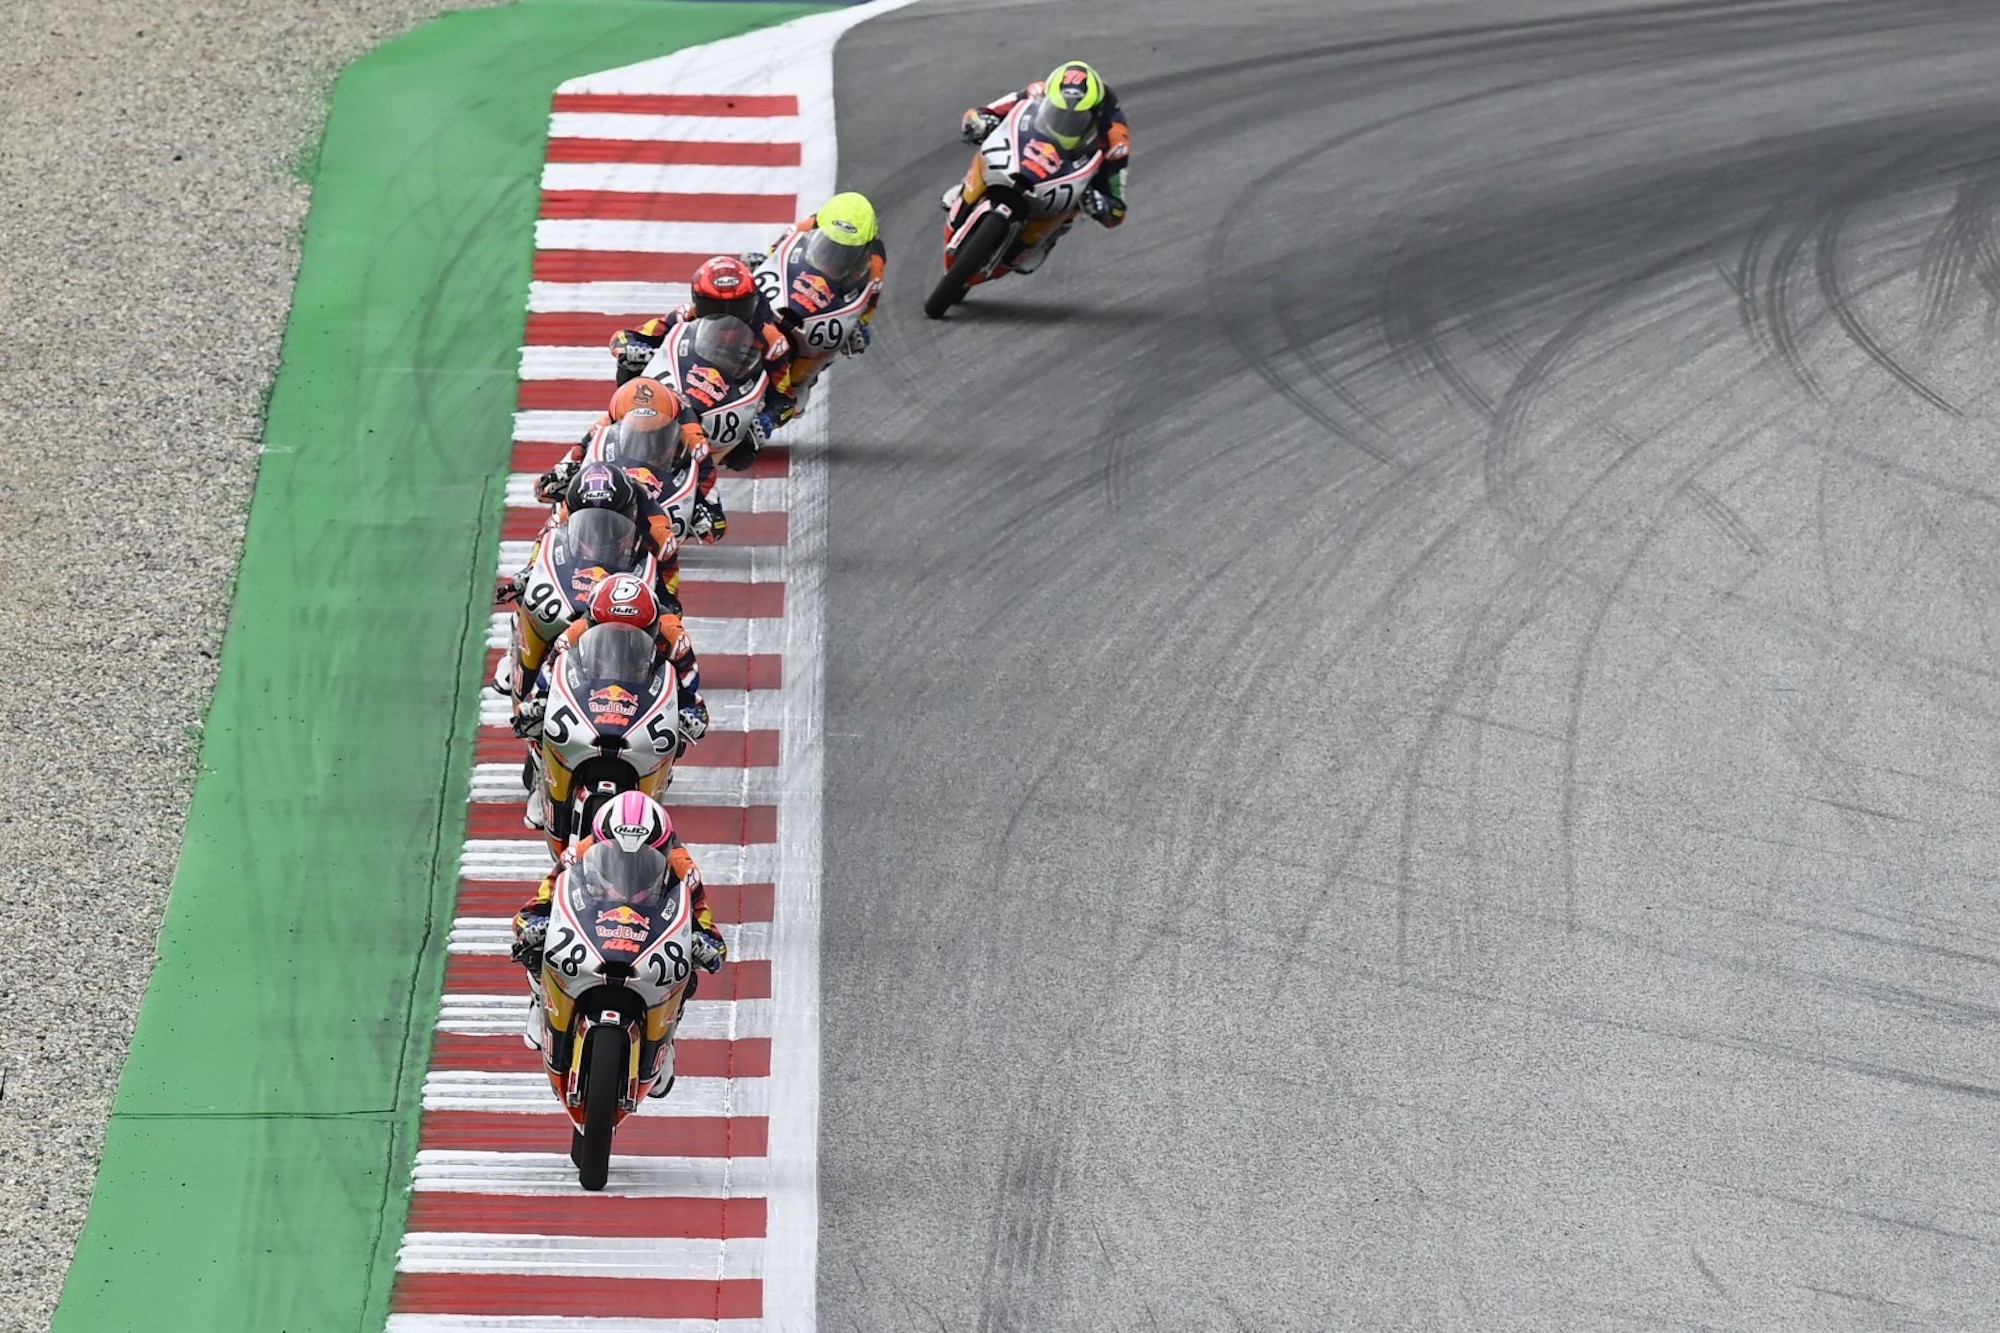 Ducati doing what they do best on the MotoGP circuit. Media sourced from Motorcycle Sports.